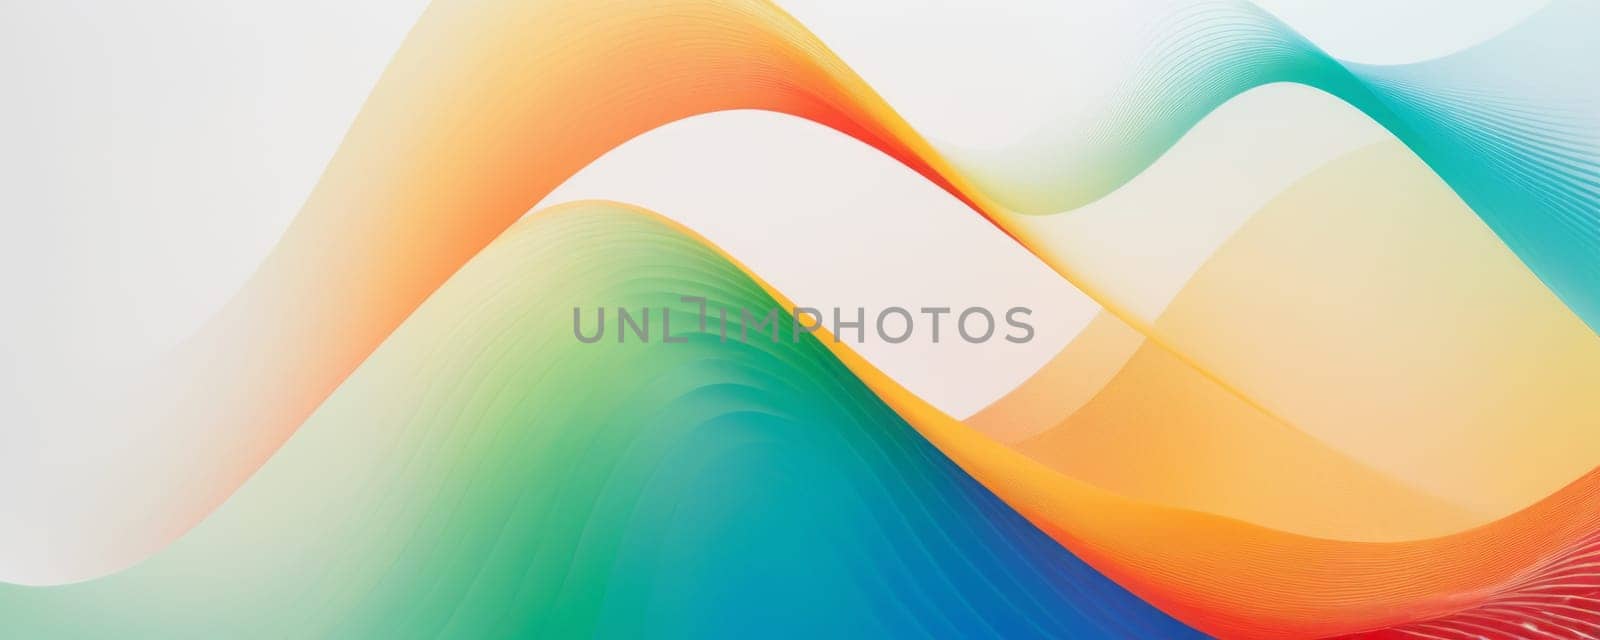 The image features abstract, colorful waves that flow smoothly across the canvas. The waves are composed of gradients of colors including green, orange, blue, and white. The design is sleek and modern with a sense of fluid motion conveyed by the overlapping layers of color. There is a harmonious blend of colors creating a visually pleasing aesthetic. Generative AI